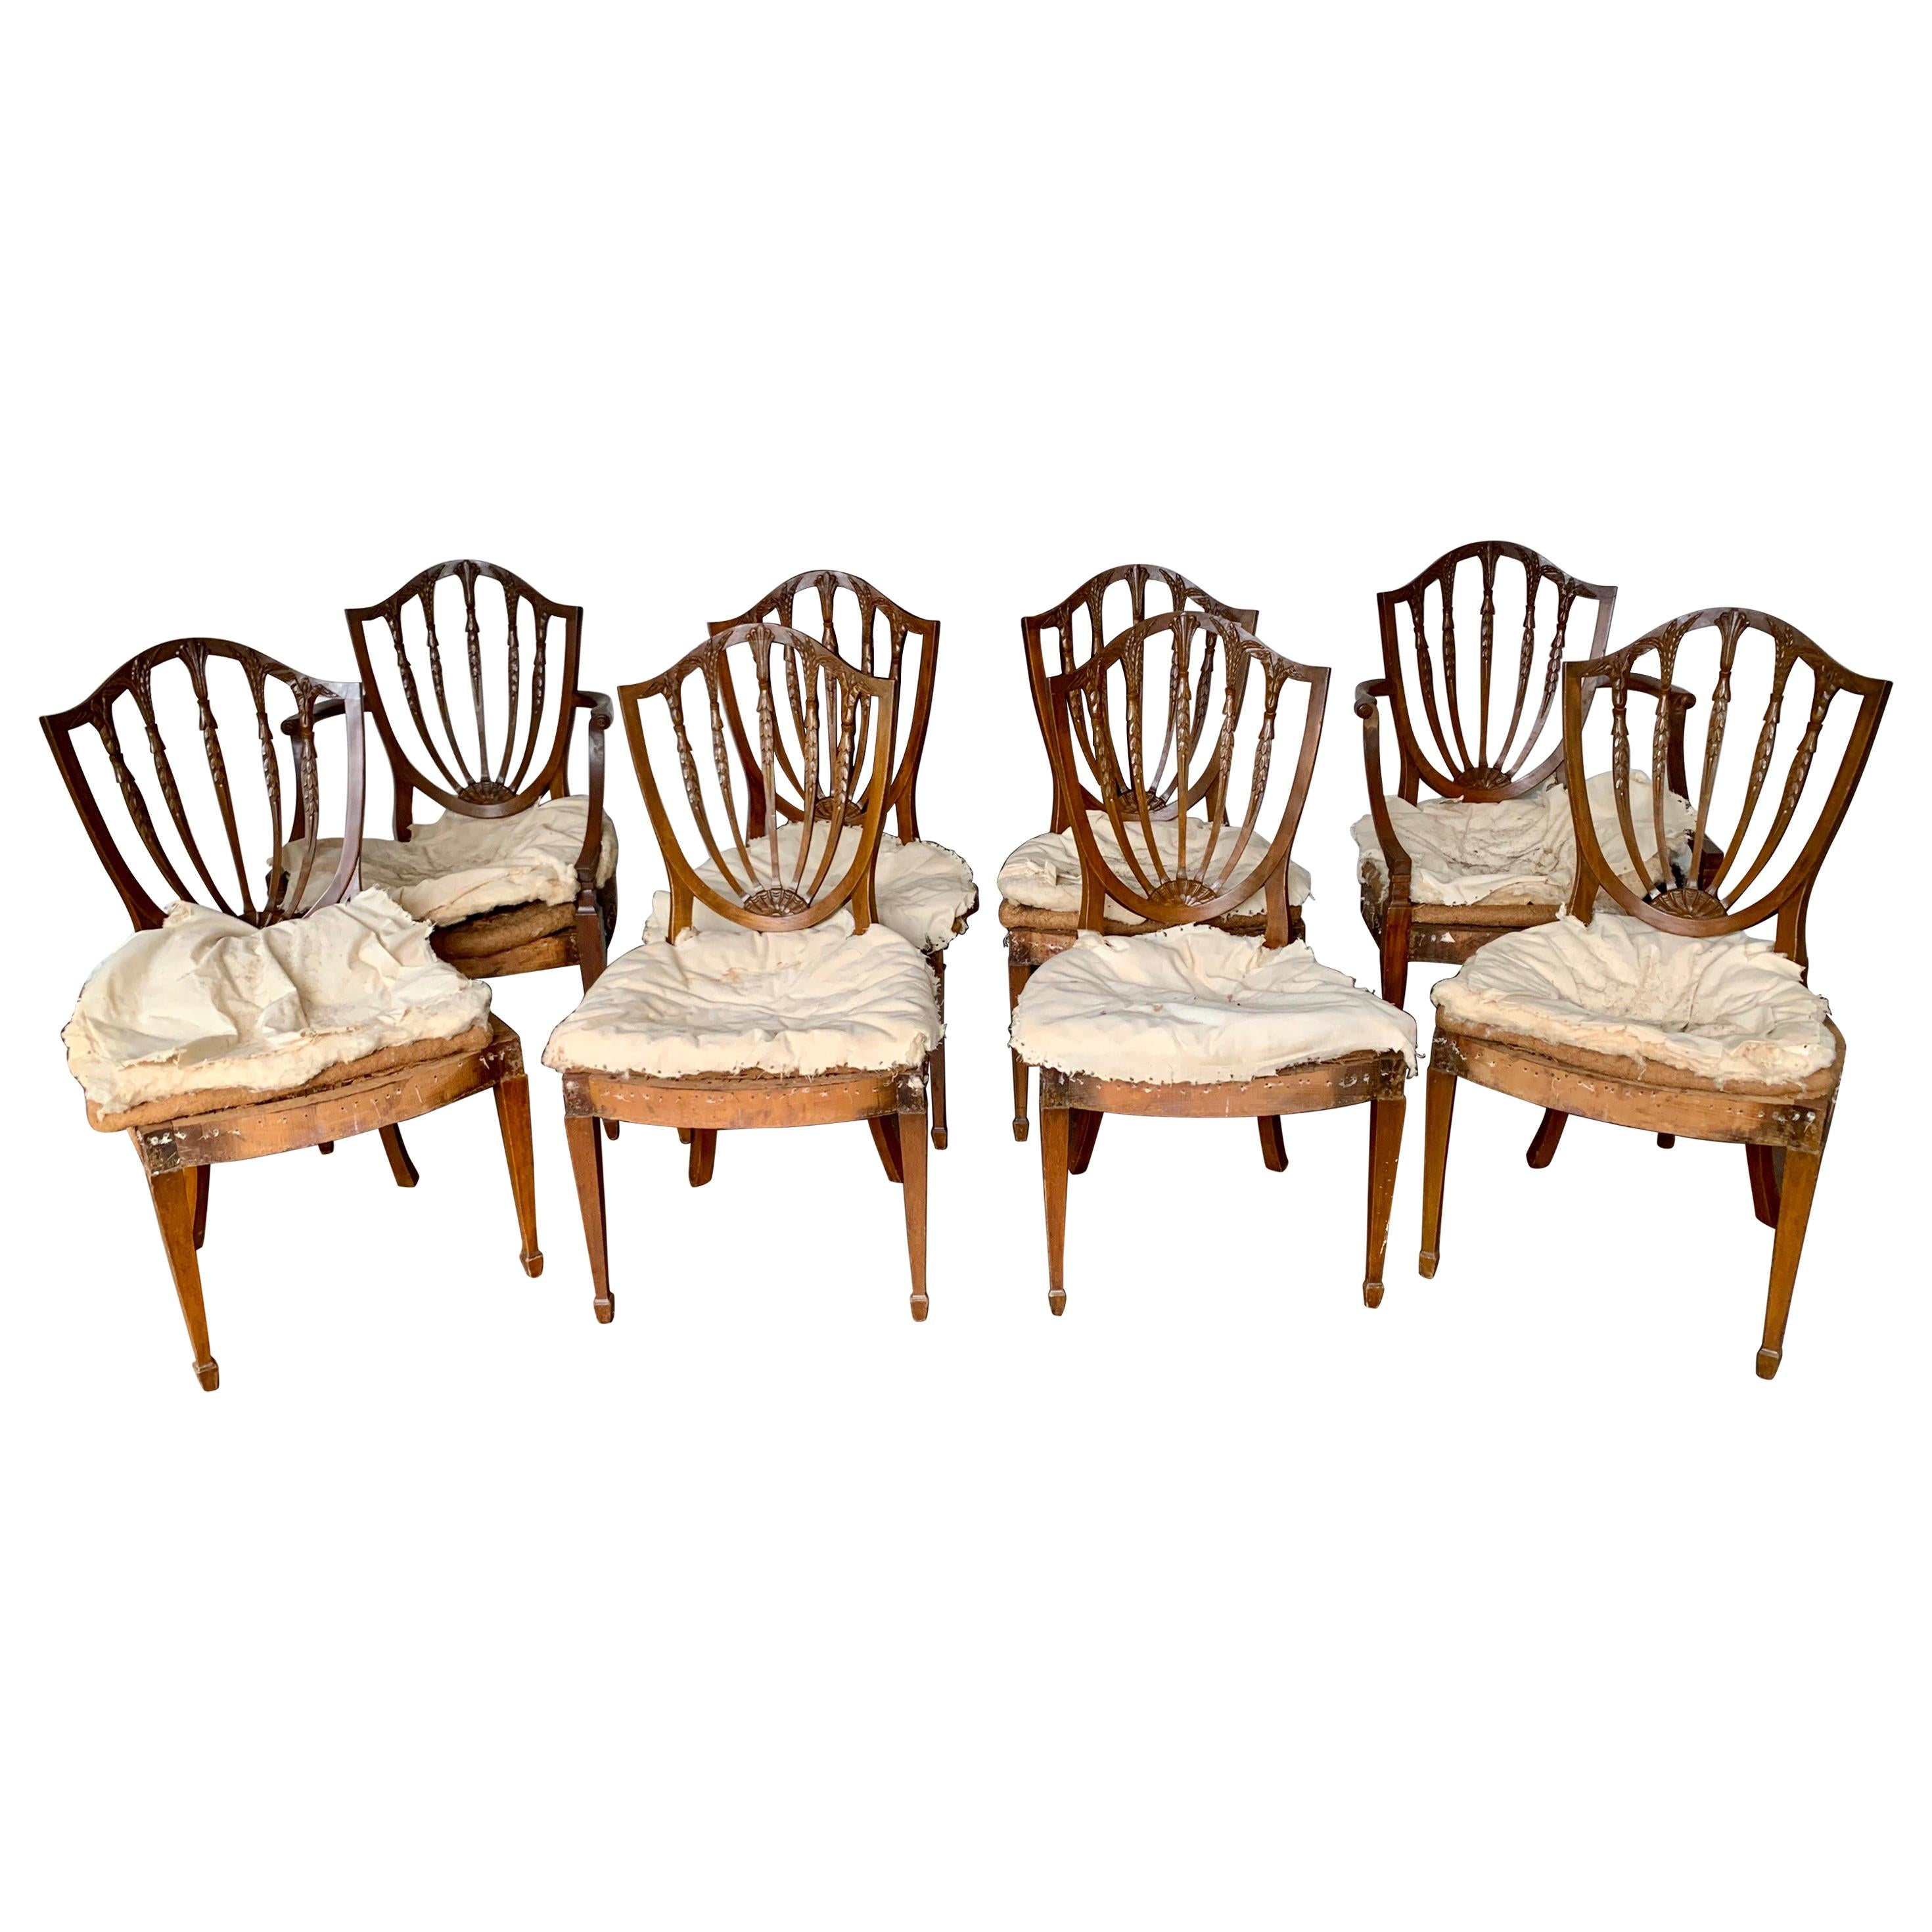 Antique Carved Mahogany Hepplewhite Wheat Shield Back Dining Chairs, circa 1840s